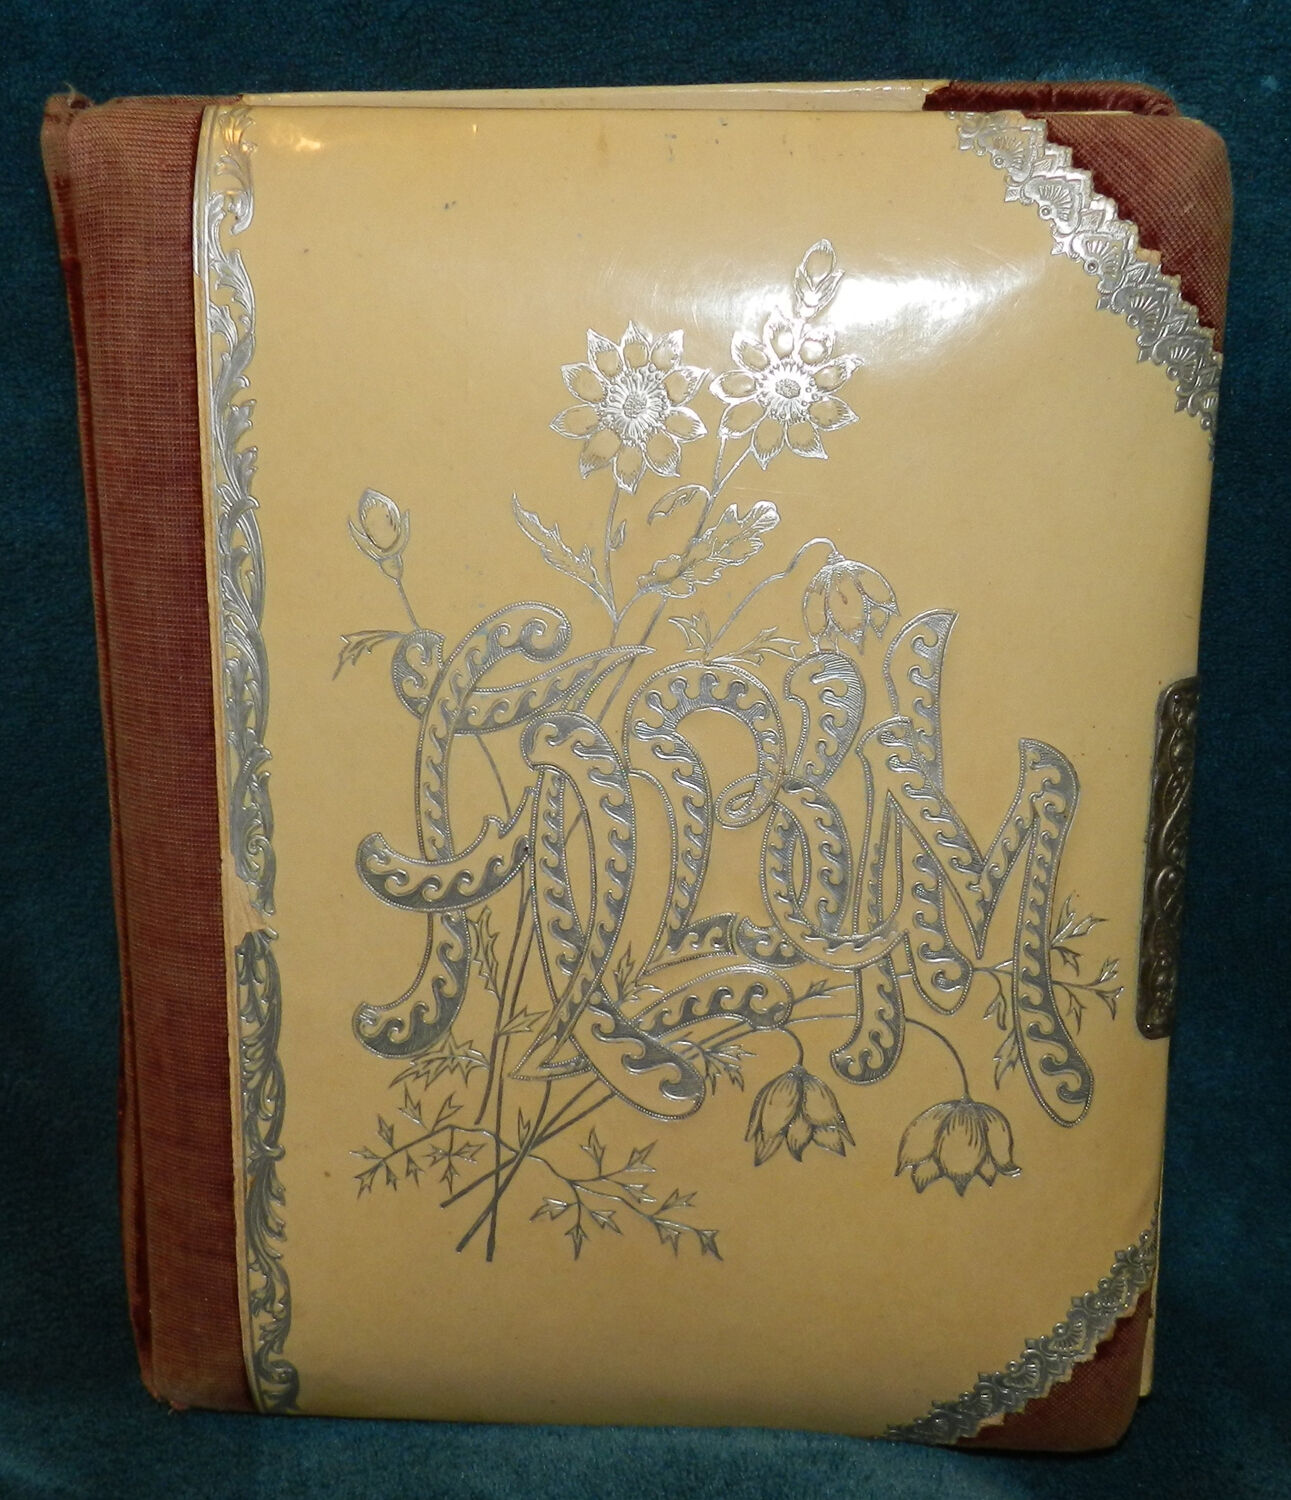 LOVELY OLD ANTIQUE/VINTAGE CREAM COLORED CELLULOID PHOTO ALBUM 